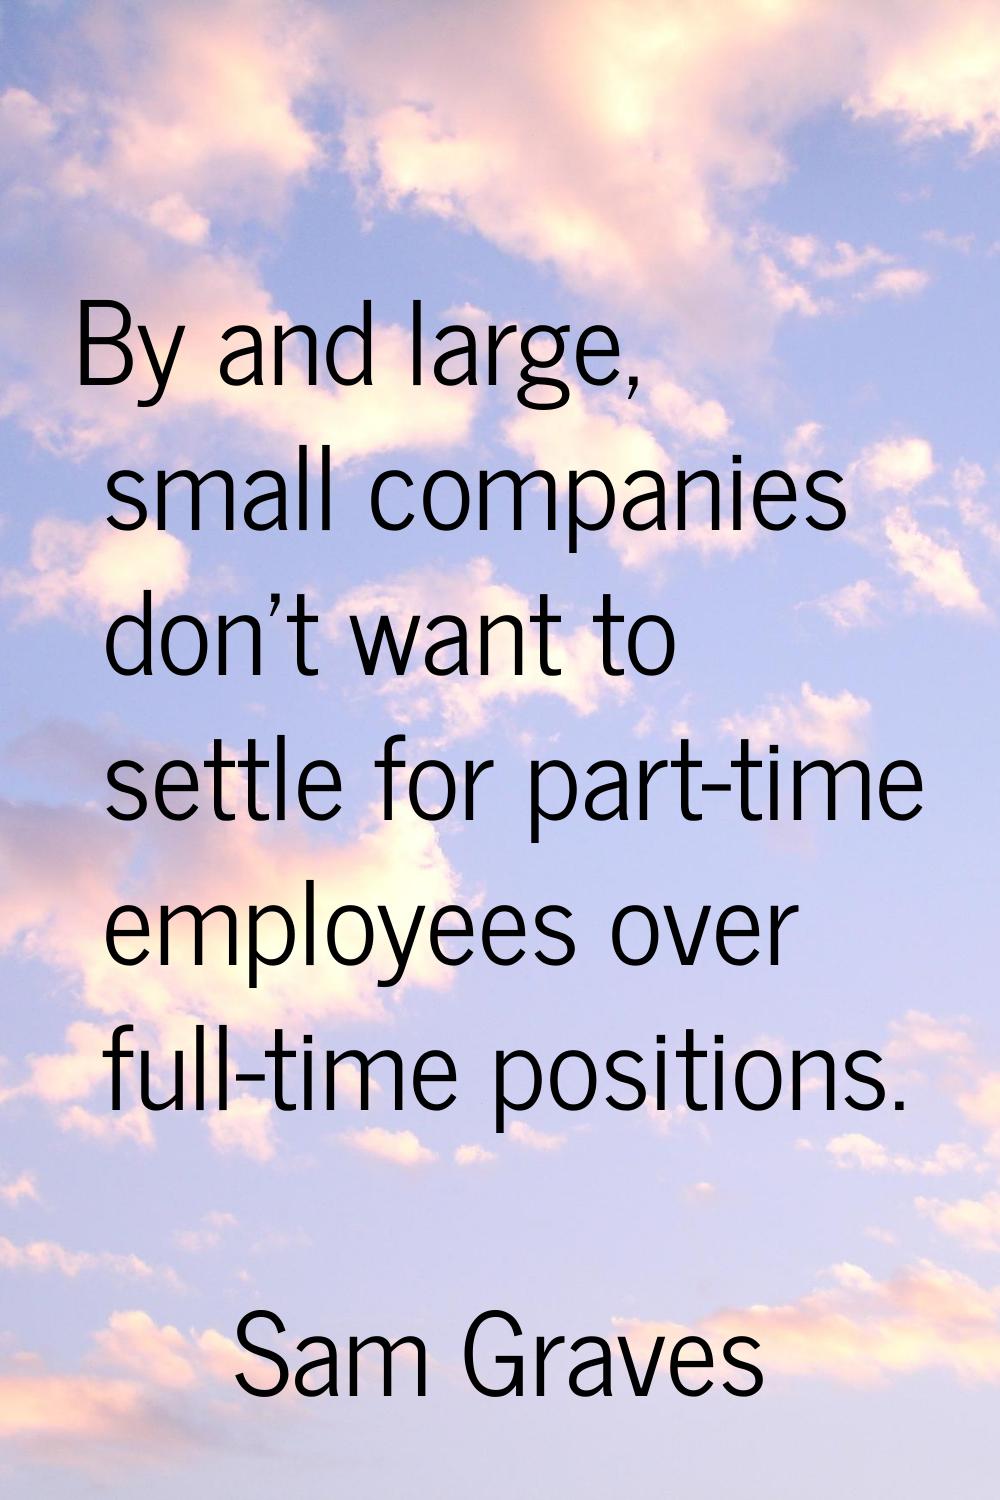 By and large, small companies don't want to settle for part-time employees over full-time positions